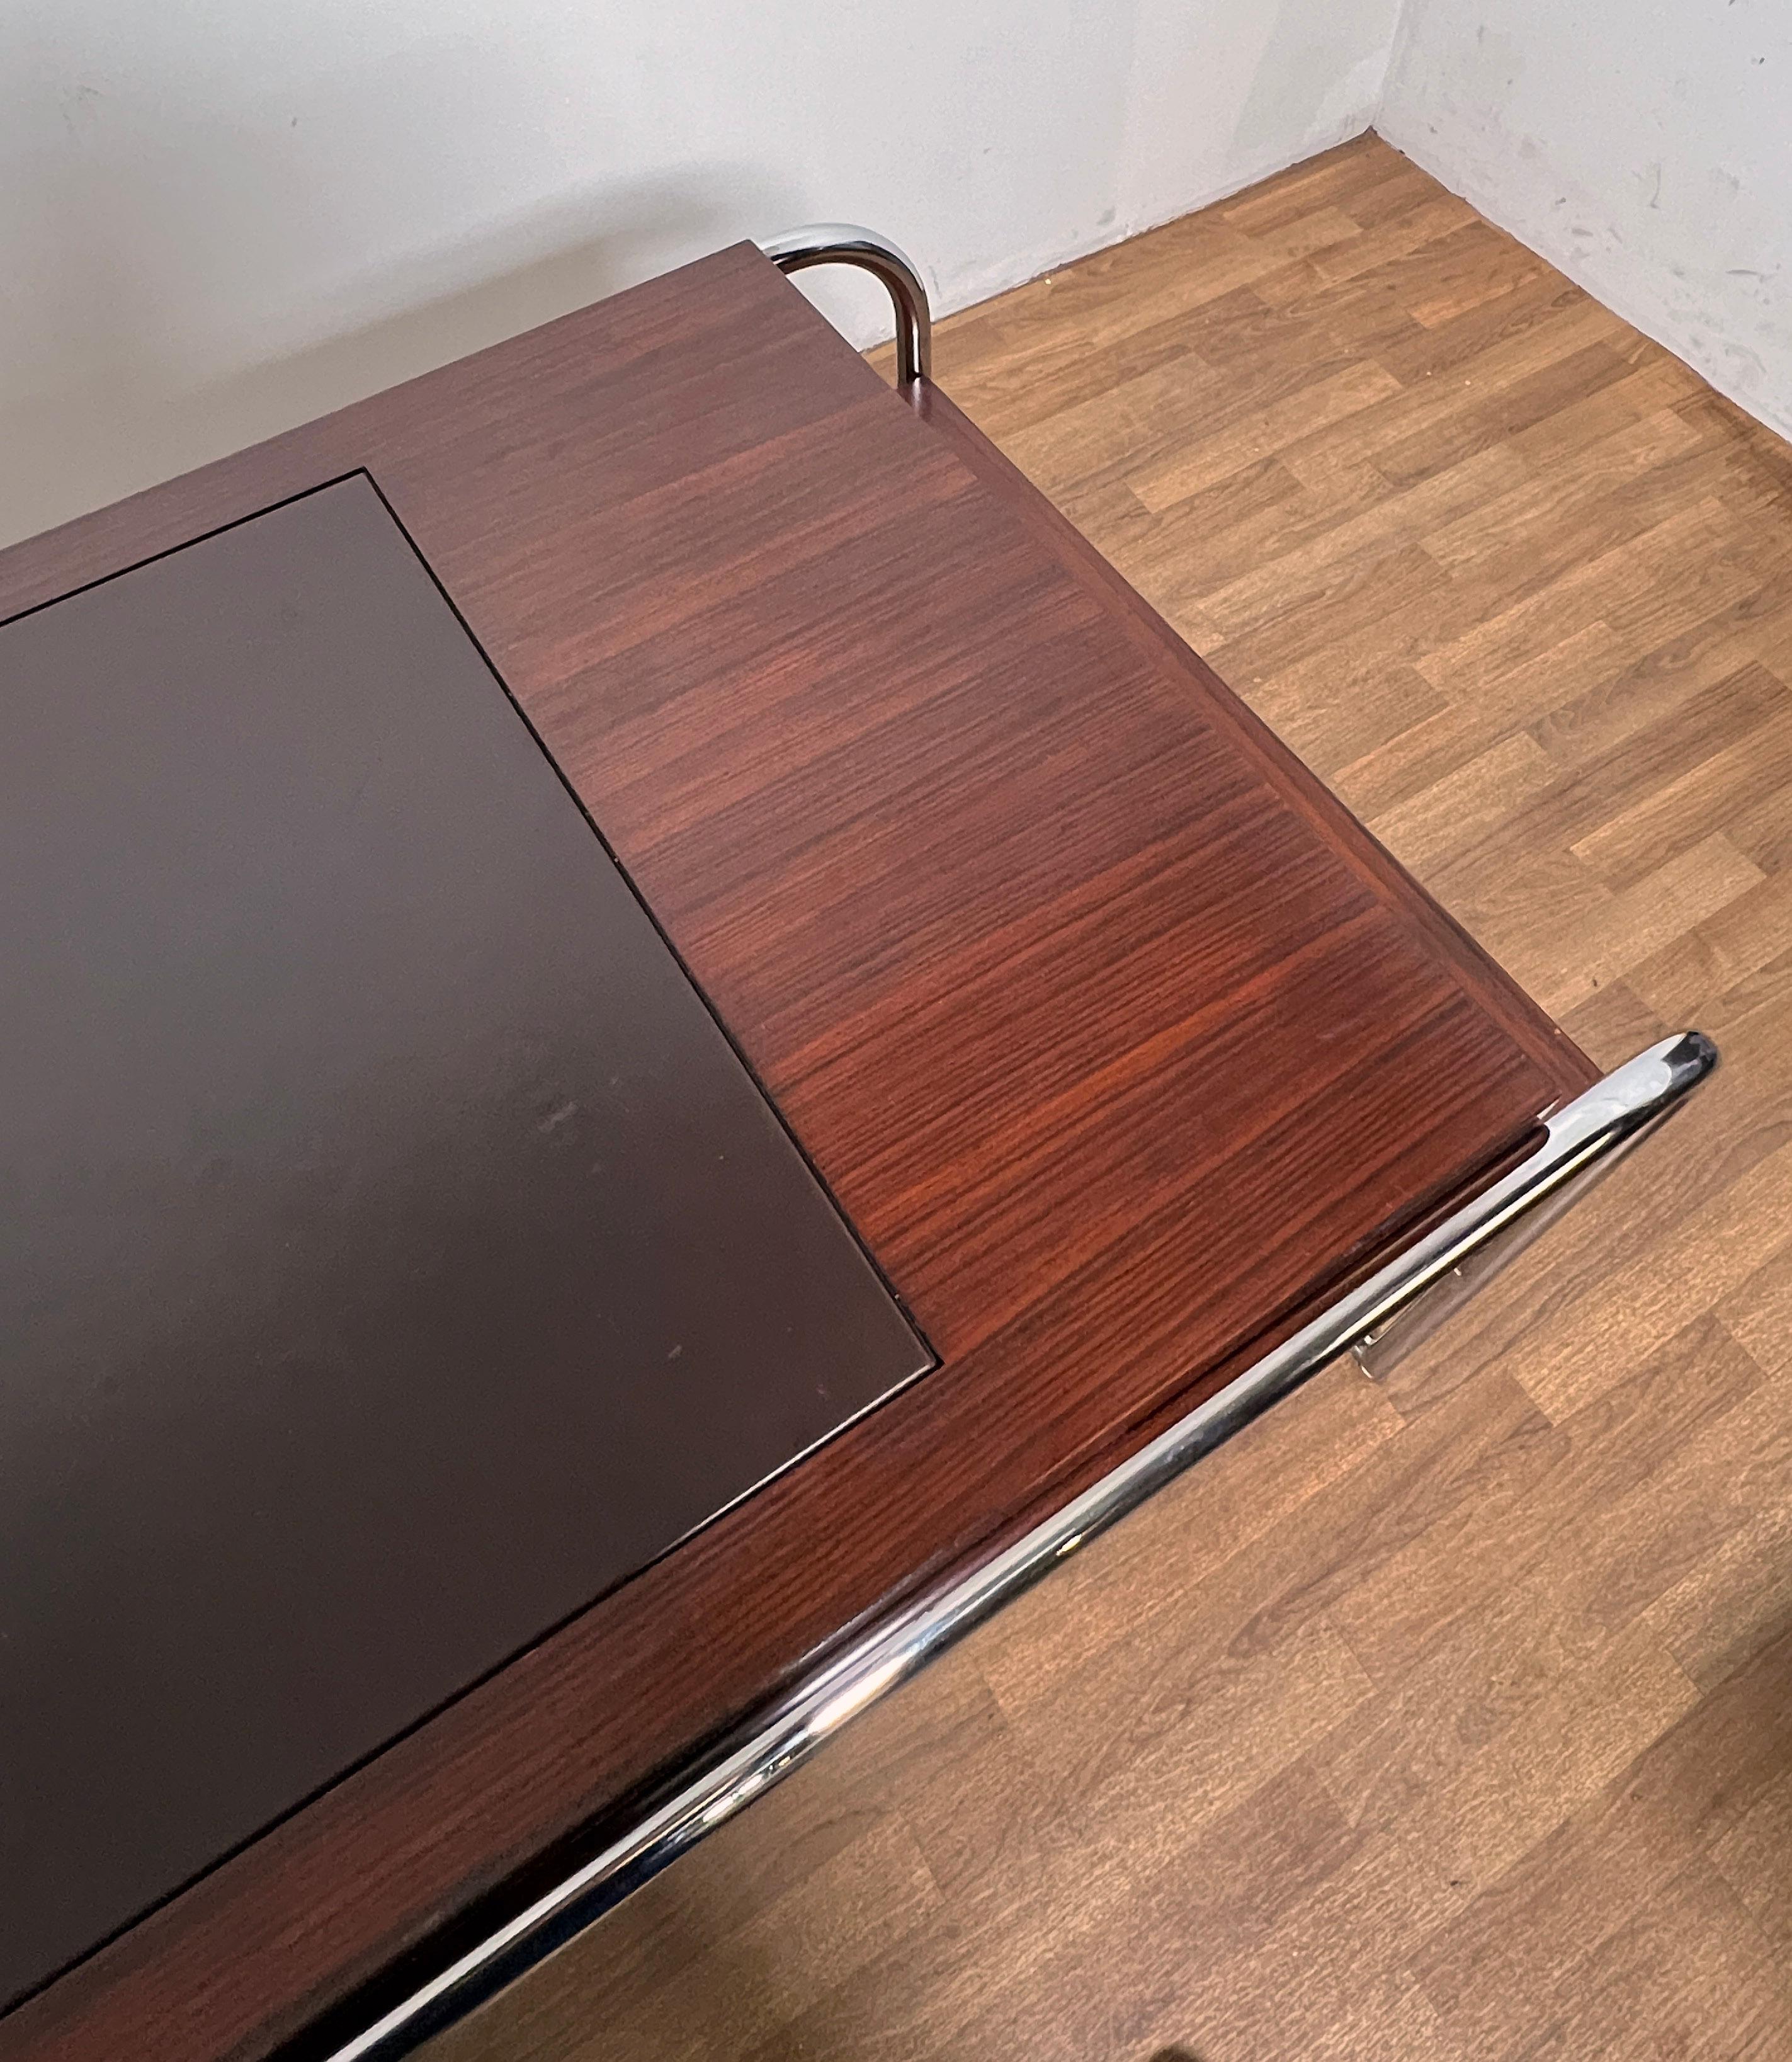 Ralph Lauren Bauhaus Inspired Desk in Rosewood, Chrome and Leather For Sale 7